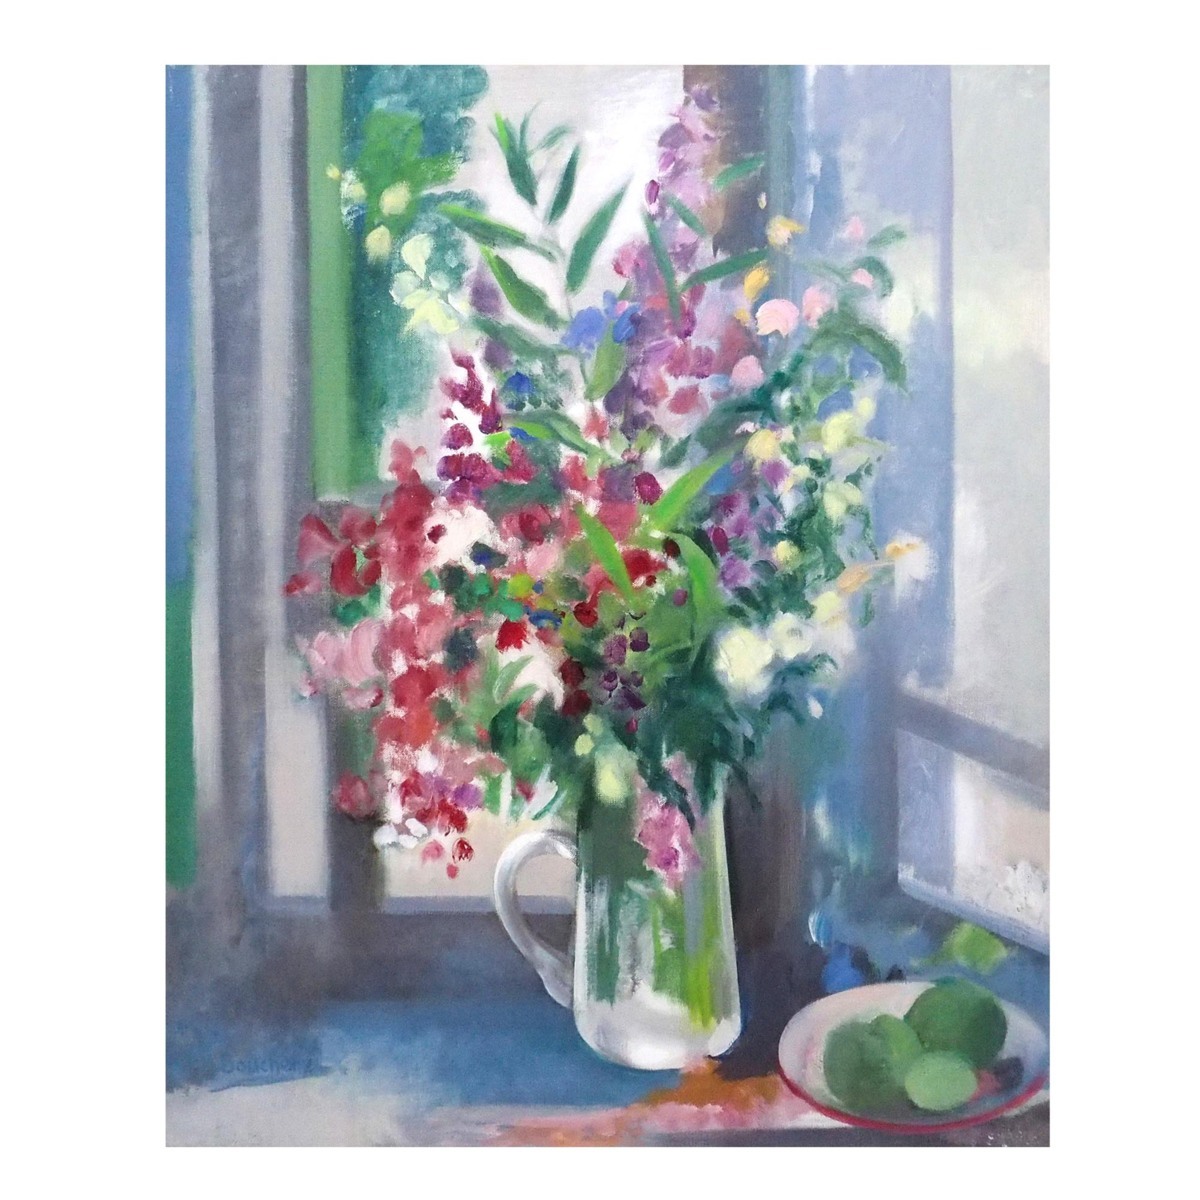 Michel Boucherie Bouquet by the Window / Oil on canvas, No. 20 / Created in 1987 / Large-format work / French artist / Authenticity guaranteed / ENCHANTE, painting, oil painting, still life painting